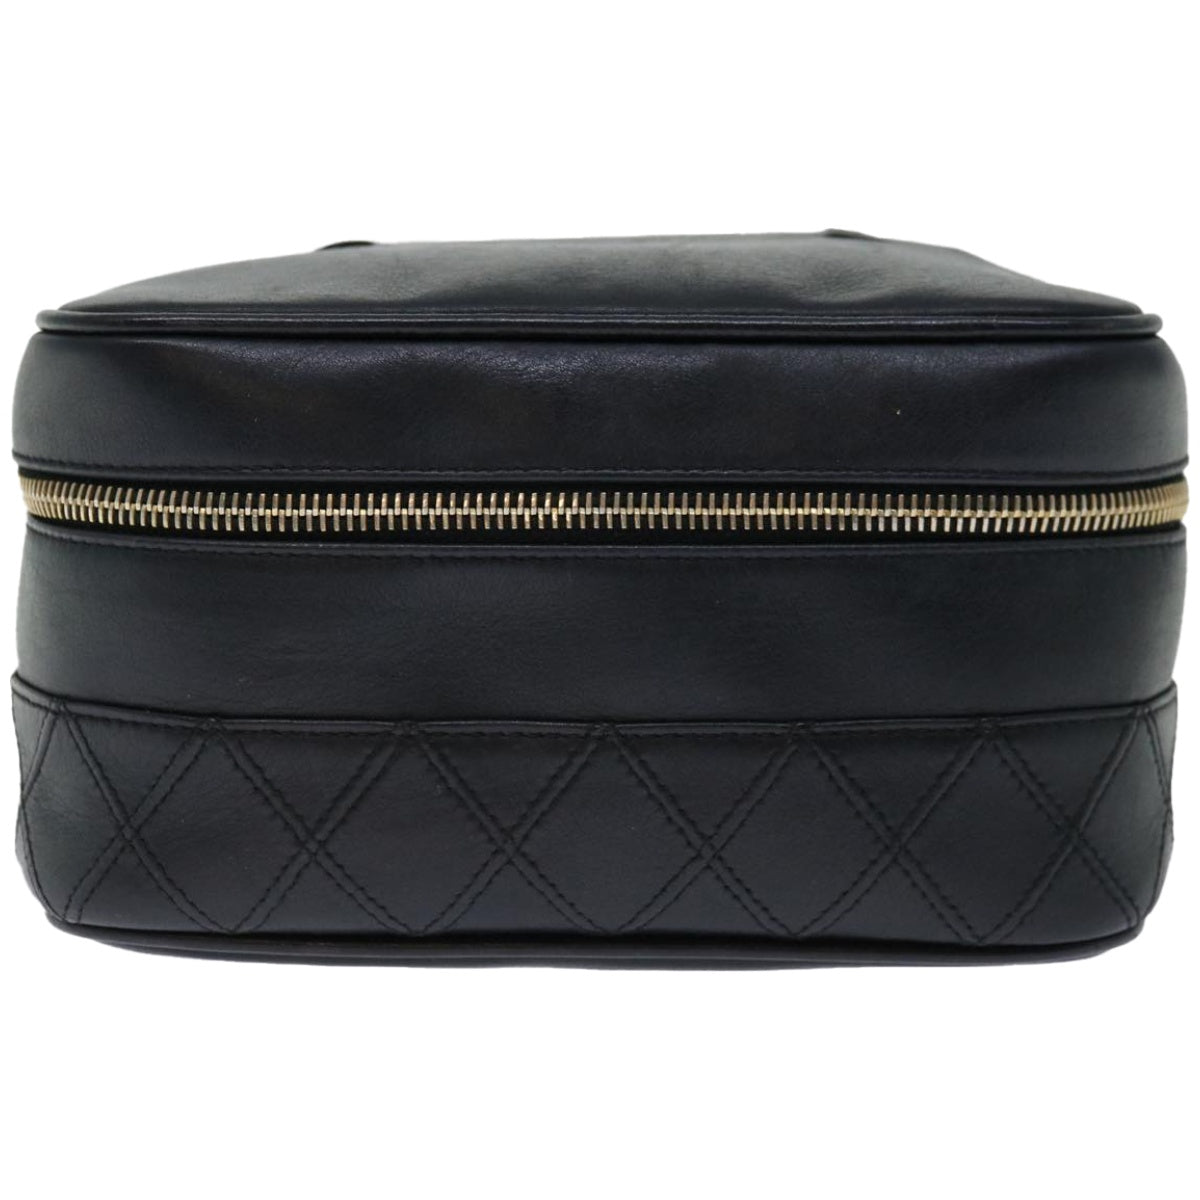 CHANEL Bicolole vanity Cosmetic Pouch Leather Black CC Auth bs12479